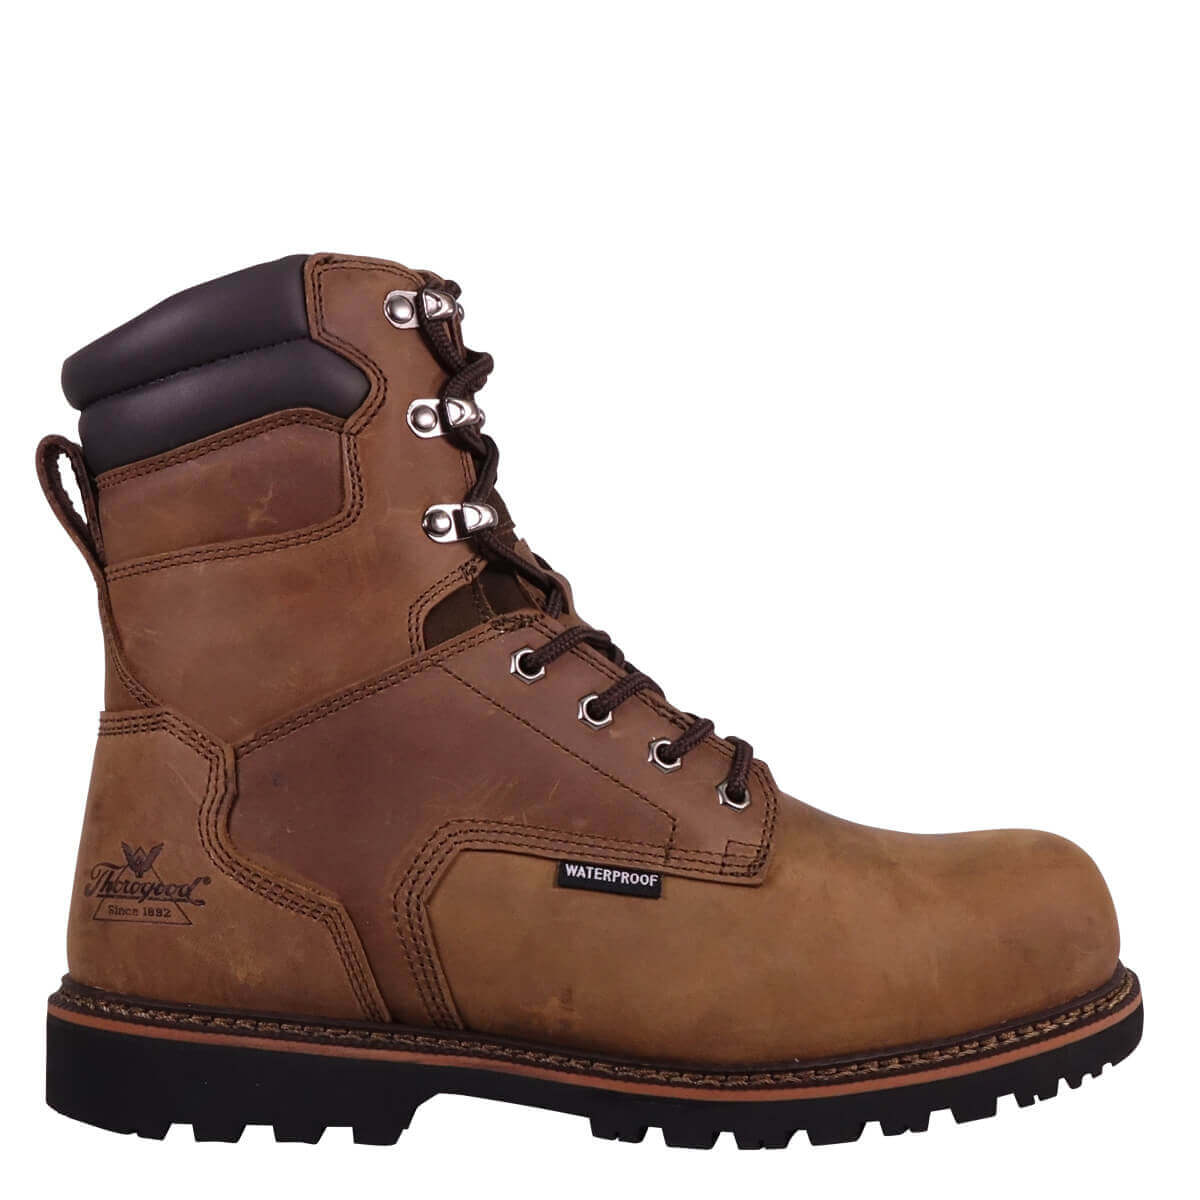 Men's Thorogood V-SERIES WATERPROOF/INSULATED – 8" CRAZYHORSE SAFETY TOE